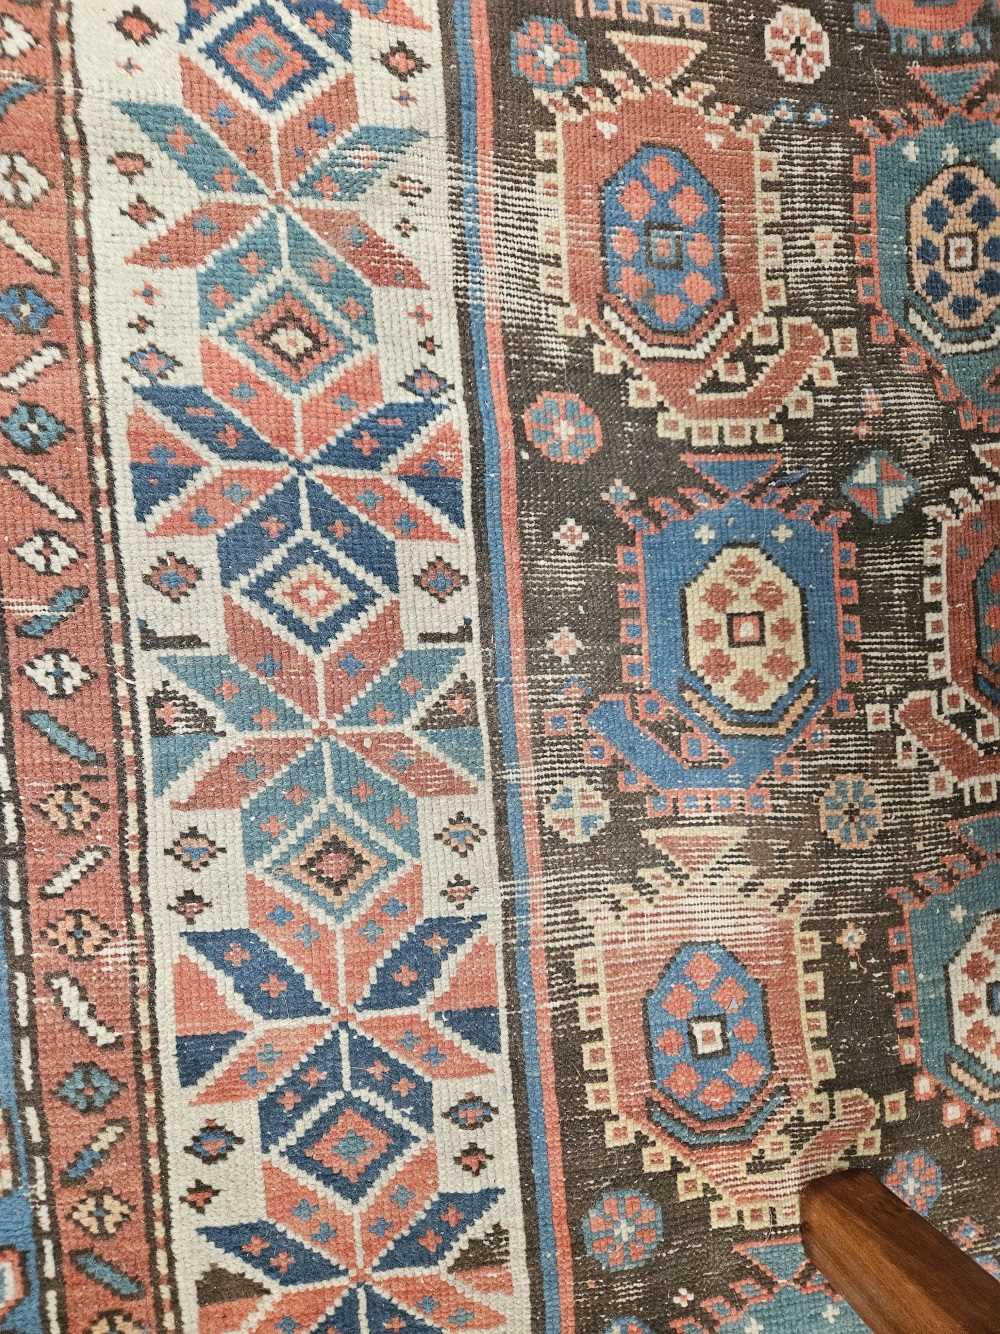 AN ANTIQUE CAUCASIAN TRIBAL RUG. - Image 3 of 7